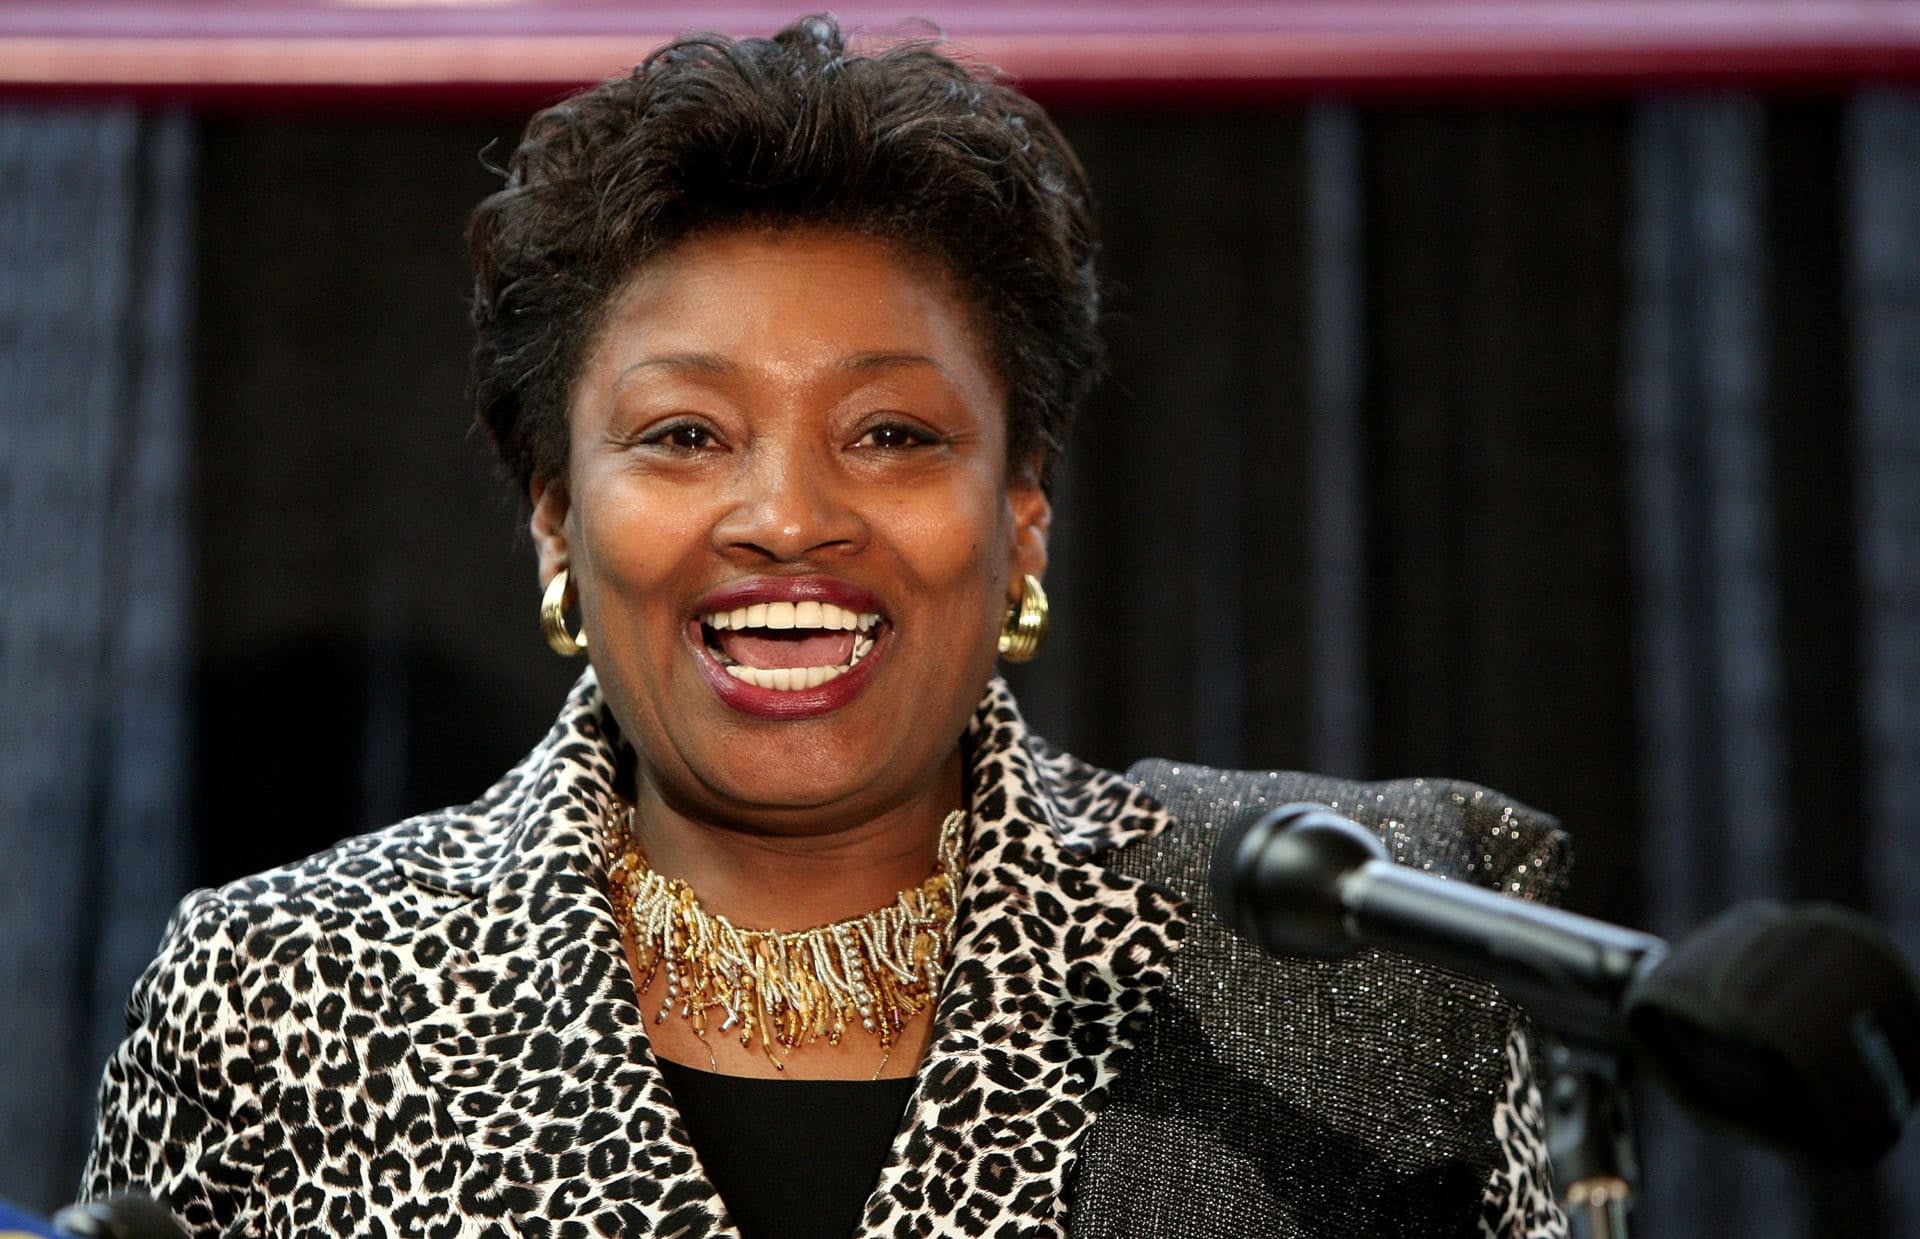 Andrea Stewart-Cousins Becomes 1st Woman To Lead New York State Legislative Chamber